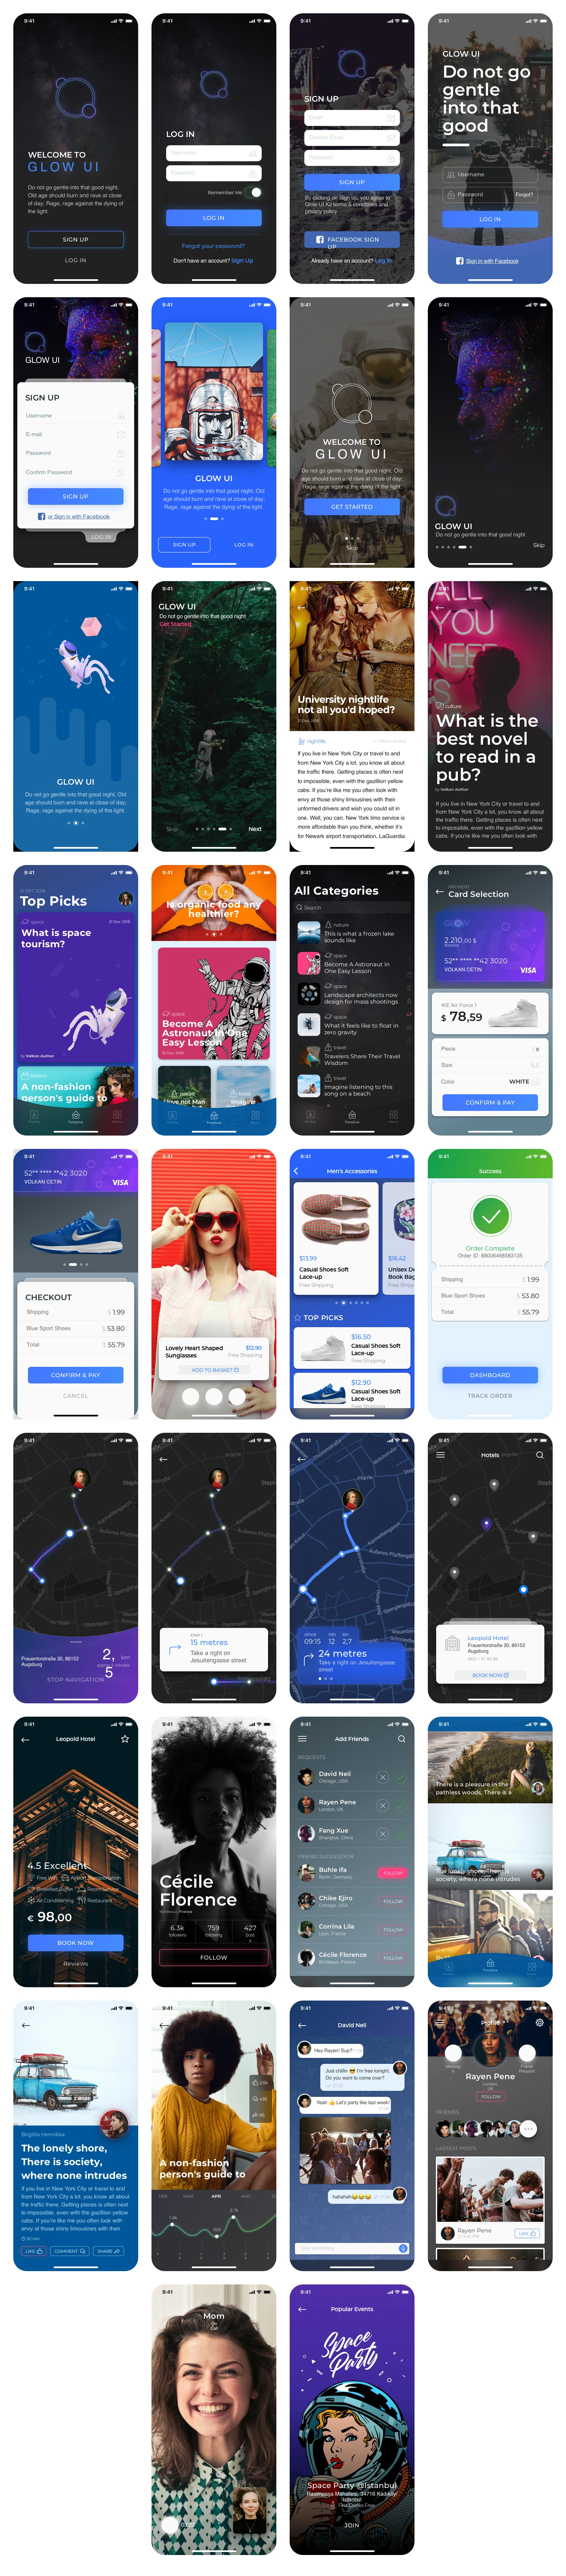 Glow UI Kit for Sketch - Glow's atomic structure provides you easily customize. Kit includes 60+ vector based design elements and 6 categories: Sign Up & Sign In, Walkthroughs, Navigation, Social, Magazine, Shopping. Glow UI Kit is free!